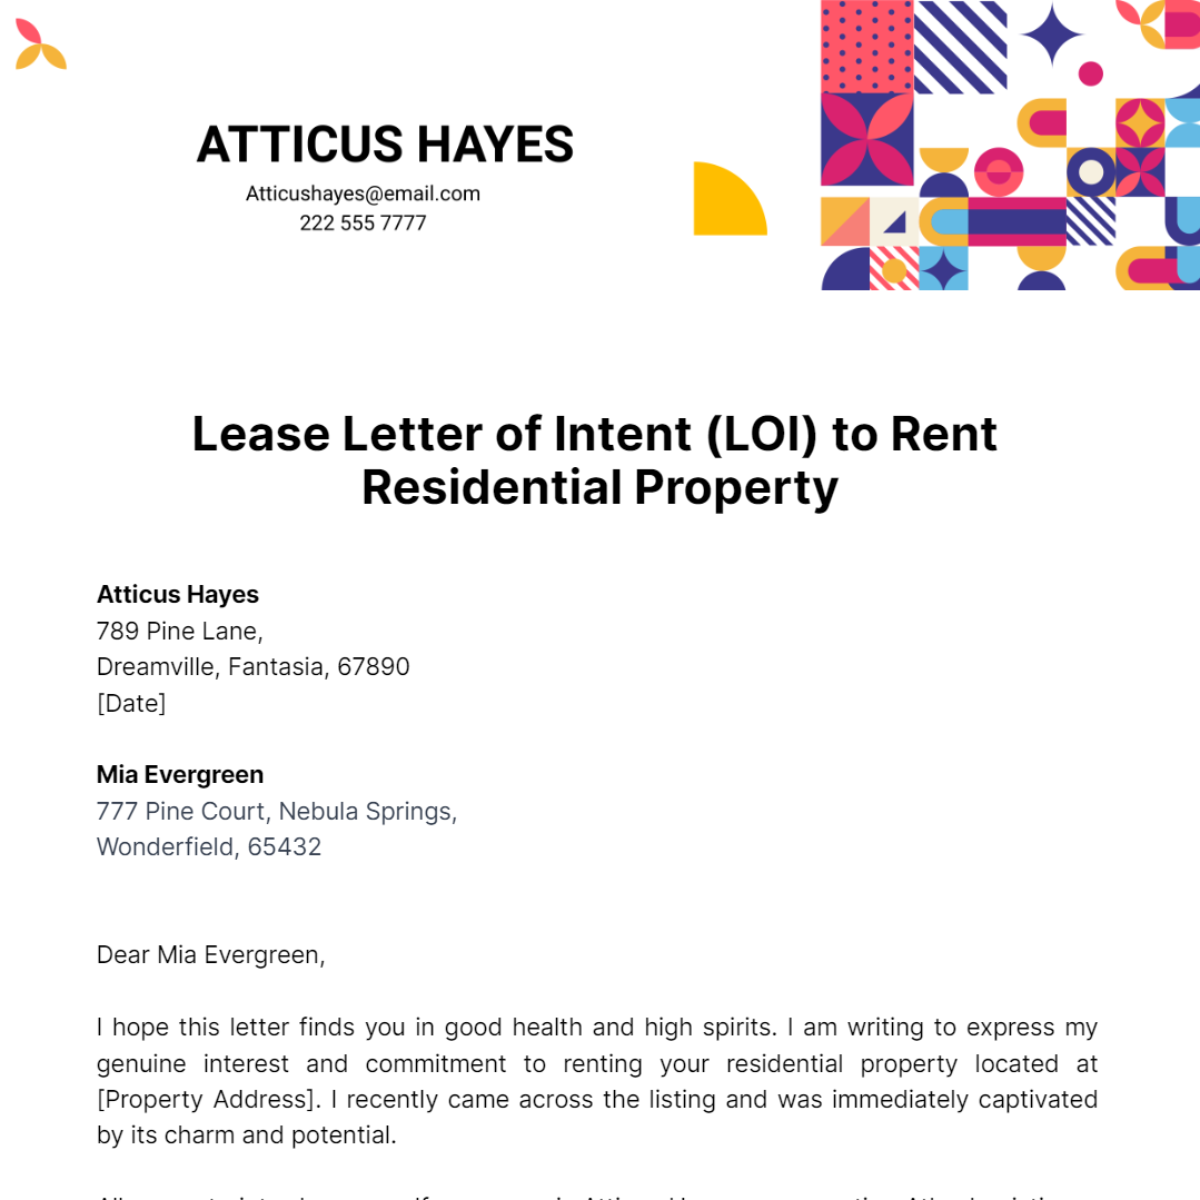 Lease Letter of Intent (LOI) to Rent Residential Property Template